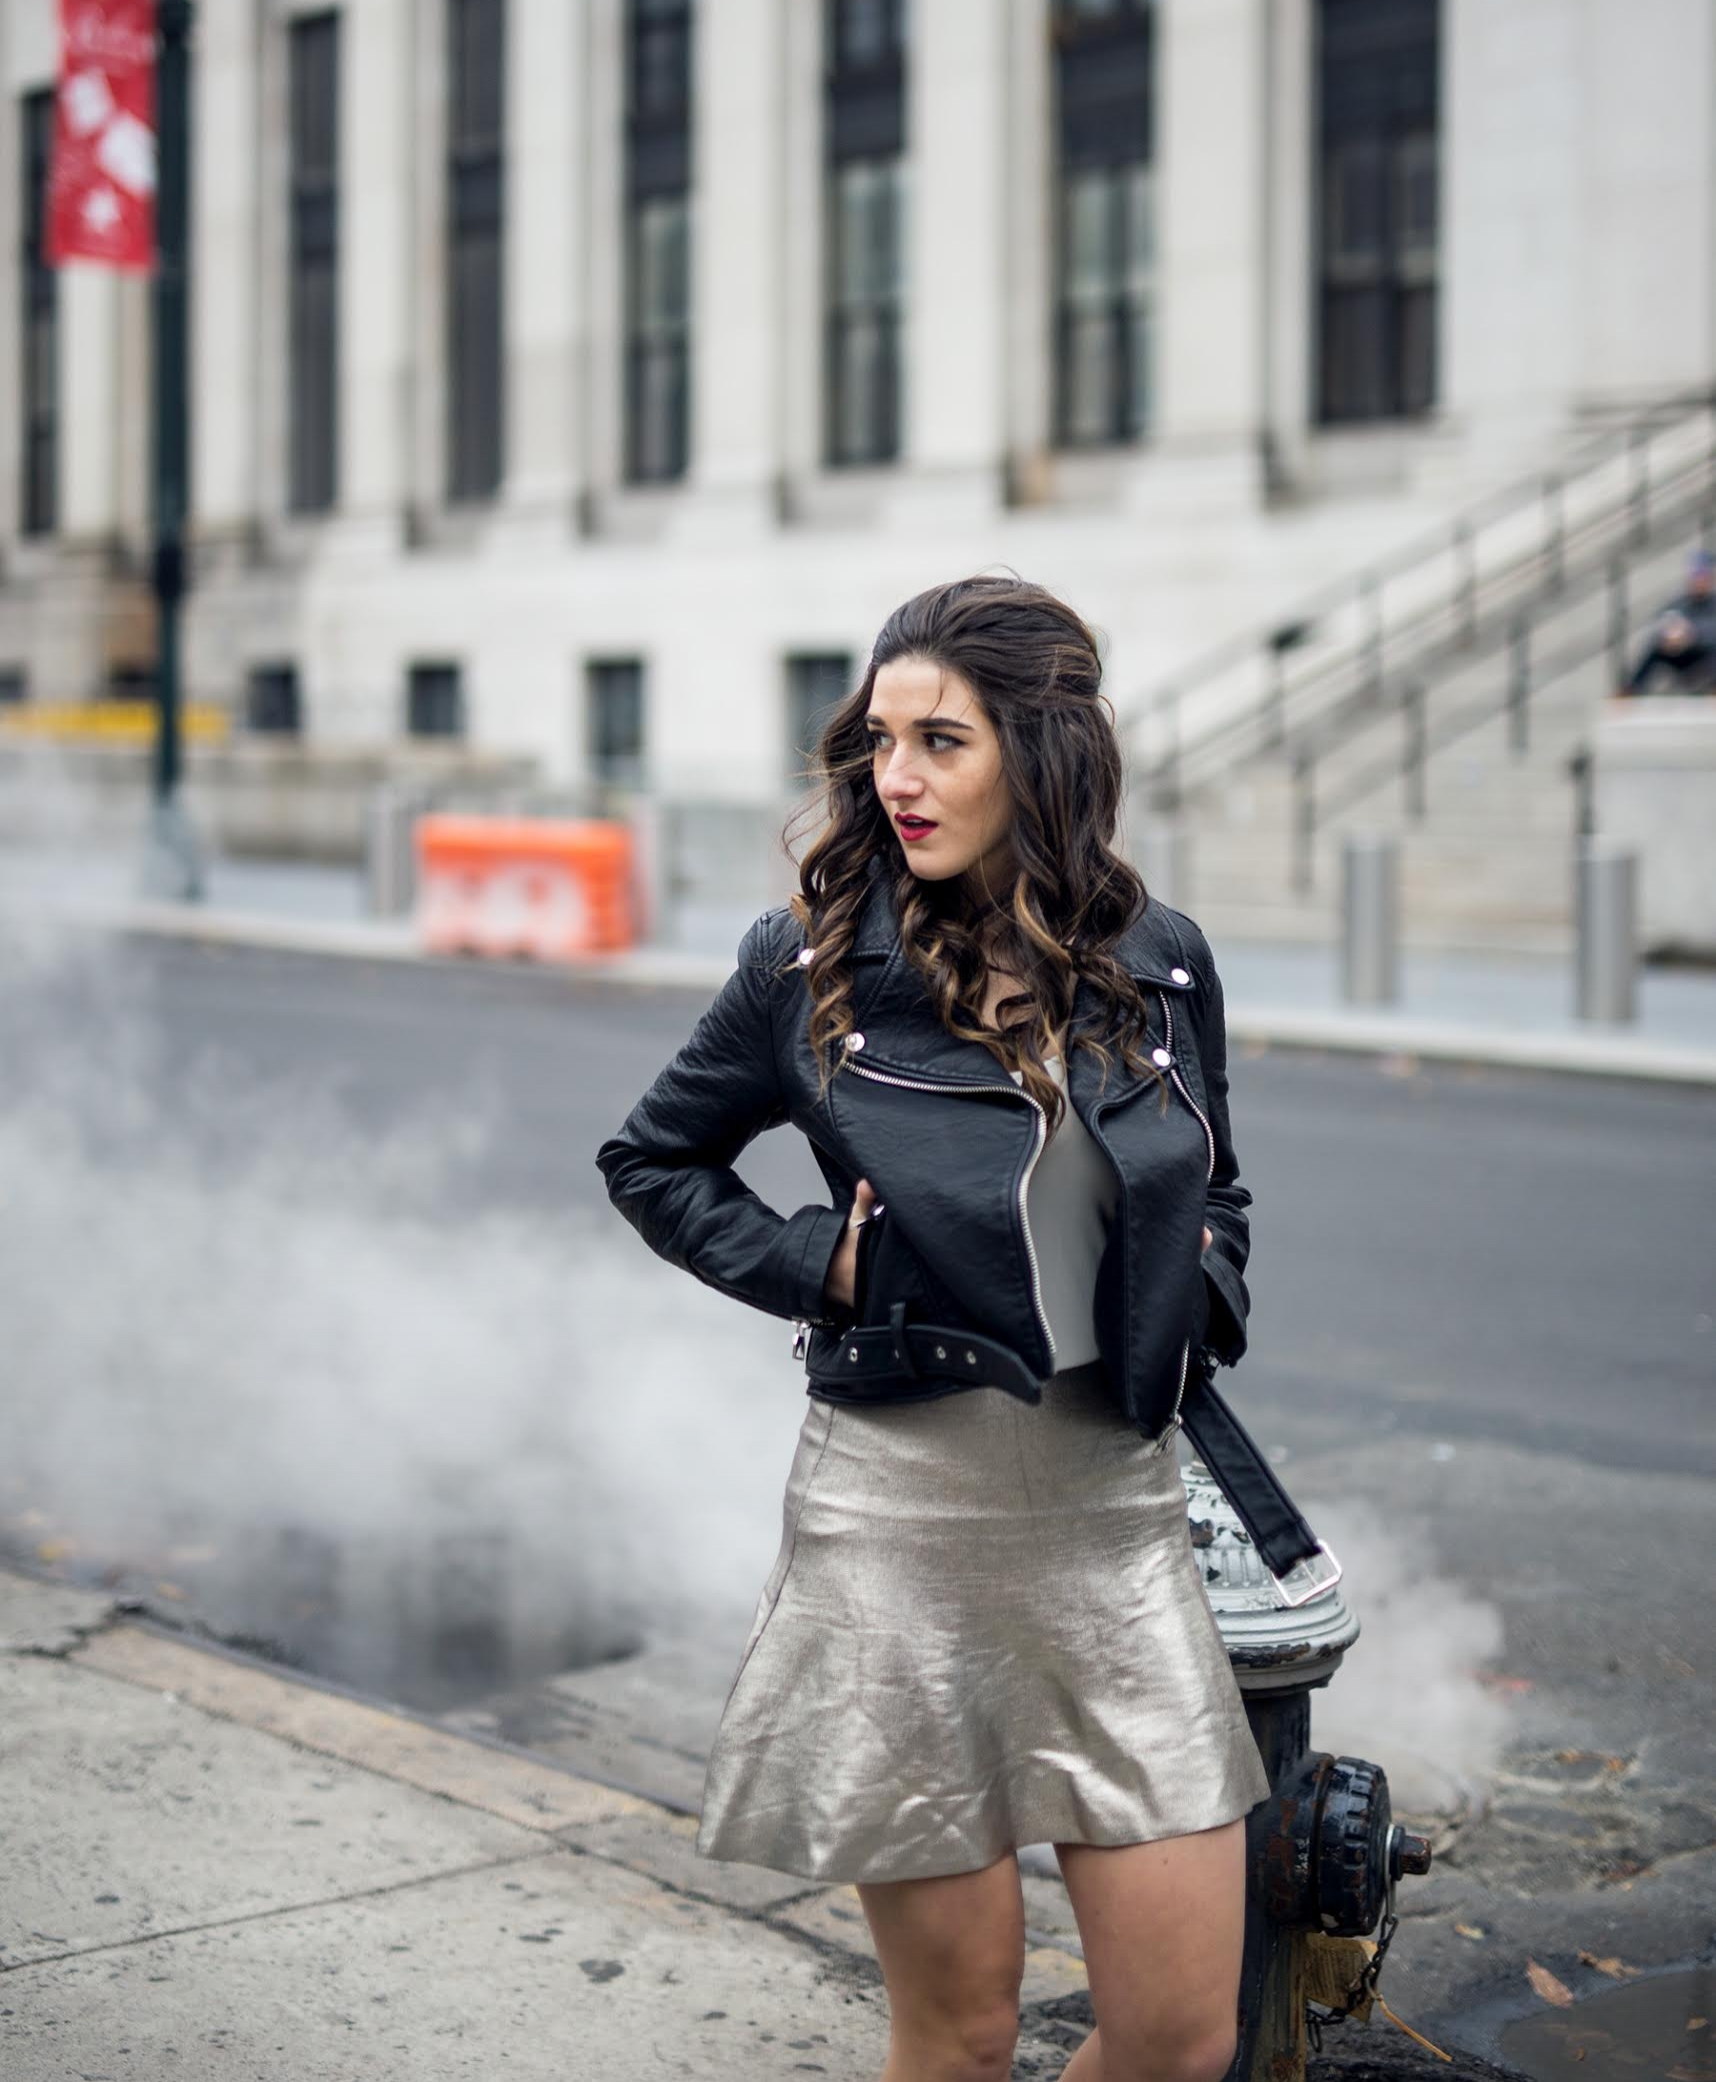 Feminine Edgy Look For The Holidays Payless Louboutins & Love Fashion Blog Esther Santer NYC Street Style Blogger Outfit OOTD Trendy Metallic Skirt Black Moto Leather Jacket Girly Lace-Up Heels Hair Shopping Women Pretty Party Shoes Photoshoot Model.jpg